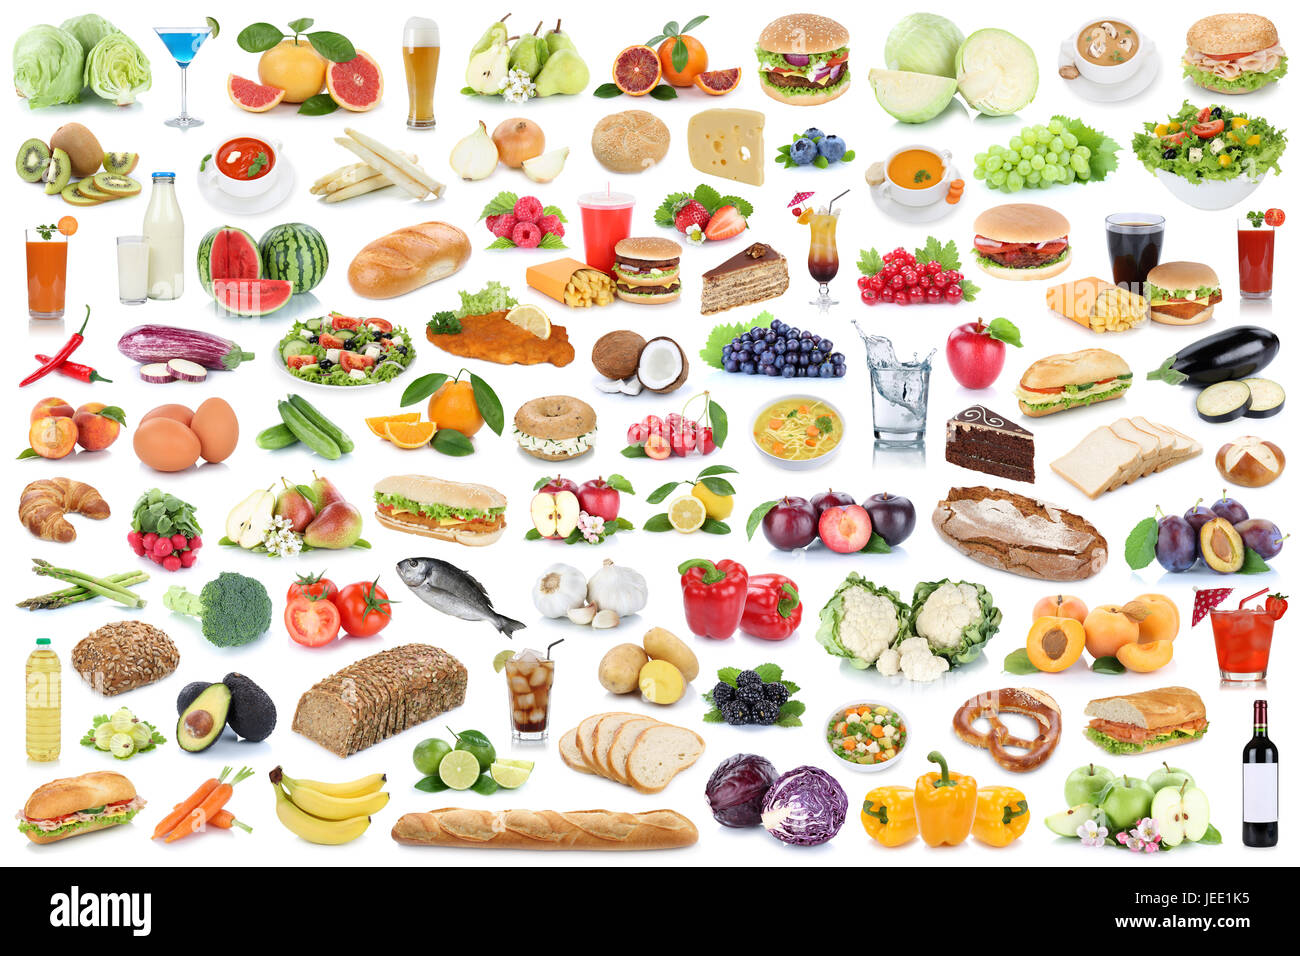 Food and drink collection collage healthy eating fruits vegetables fruit drinks isolated on a white background Stock Photo